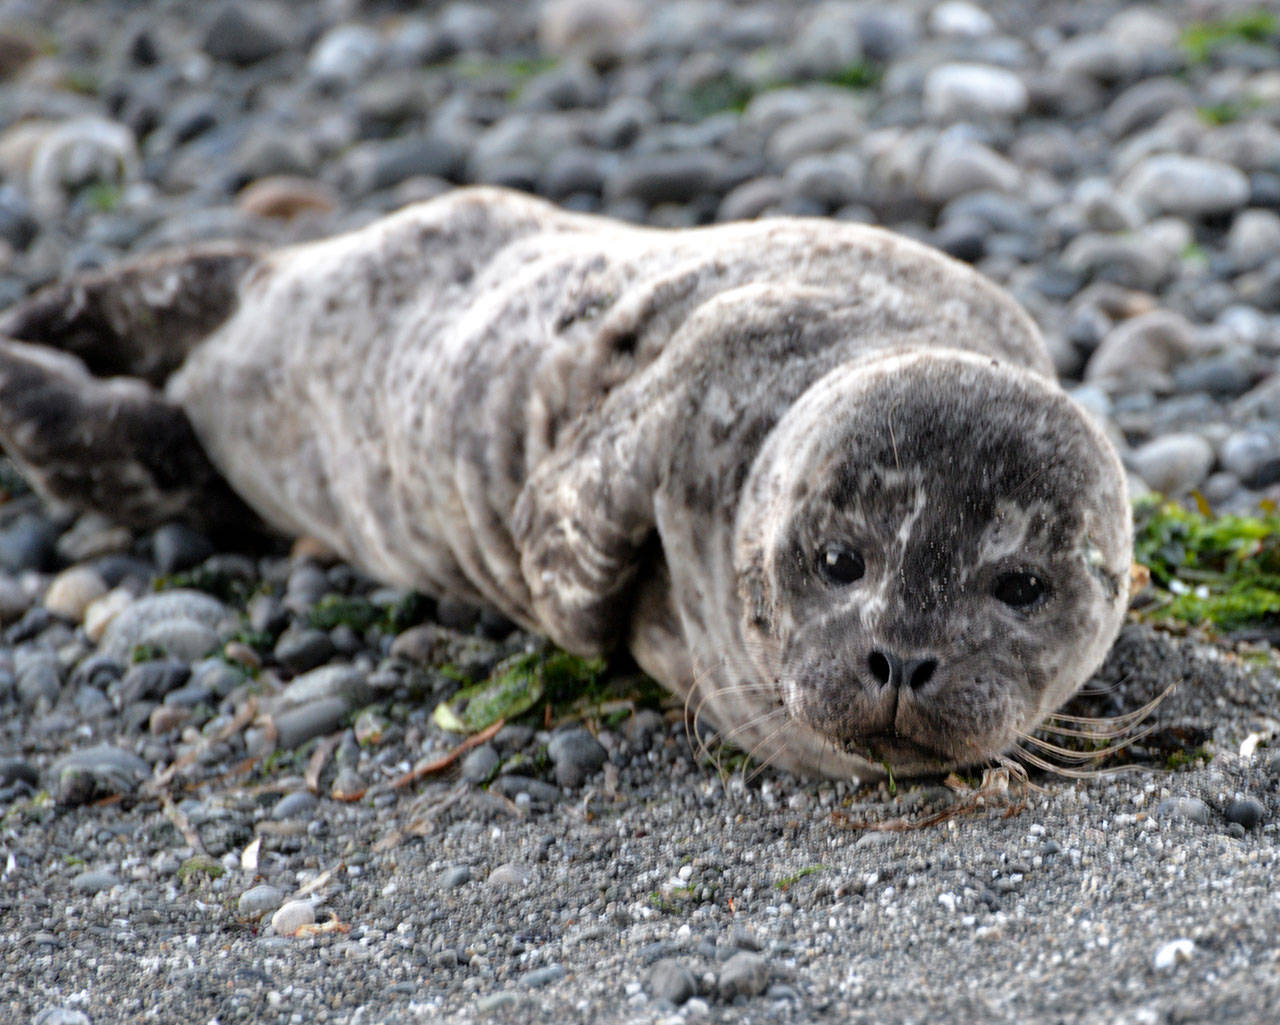 This seal pup was spotted last week at KVI. Marine mammal stranding coordinator Ann Stateler cautioned islanders to stay far away from seal pups so as not to interfere with natural processes. Photos, like this one above, should be taken only from a considerable distance away (Cascadia Research Collective Photo).